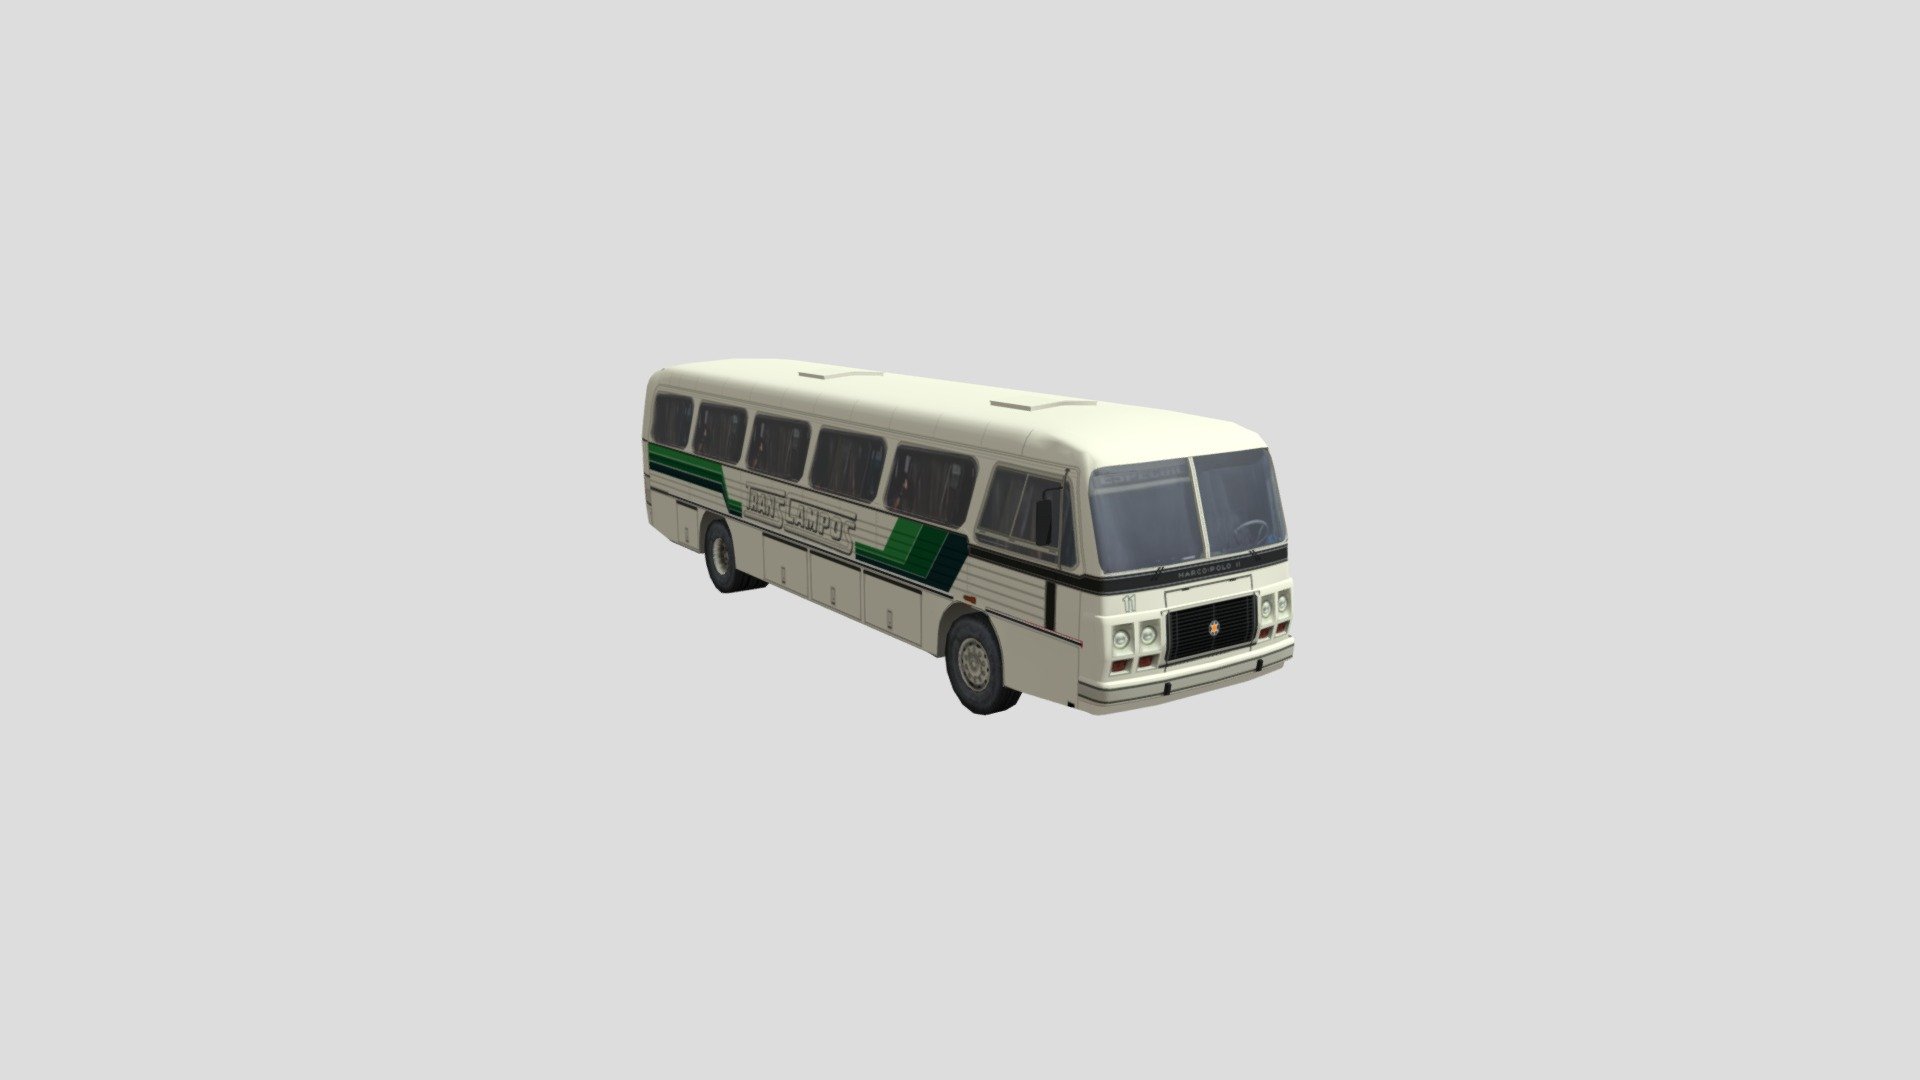 In this asset, I bring a bus body model that was very popular in Brazil and in some Latin American countries in the 70s.
The production of this model bodywork started in 1971 and ended in 1975 (its successor Marcopolo III went into production at the end of 74).

For me this model of bus represents a lot, especially with the painting of this company, TransCampos, a local company (now extinct) that connected two small towns in the interior of my state.

Me, my brother and my mother sometimes traveled on this exact model of bus, the route was always a dirt road (often in poor condition), either in one direction to go near the case of my maternal grandparents, or else , in the other direction to the largest city in the region, Pelotas (Rio Grande do Sul).

The journeys were always slow and sick of the vehicle rocking on the road, countless times I, my brother or random passengers ended up vomiting through the window On bad days someone vomited inside the vehicle and the odor made the journey even more unbearable 3d model